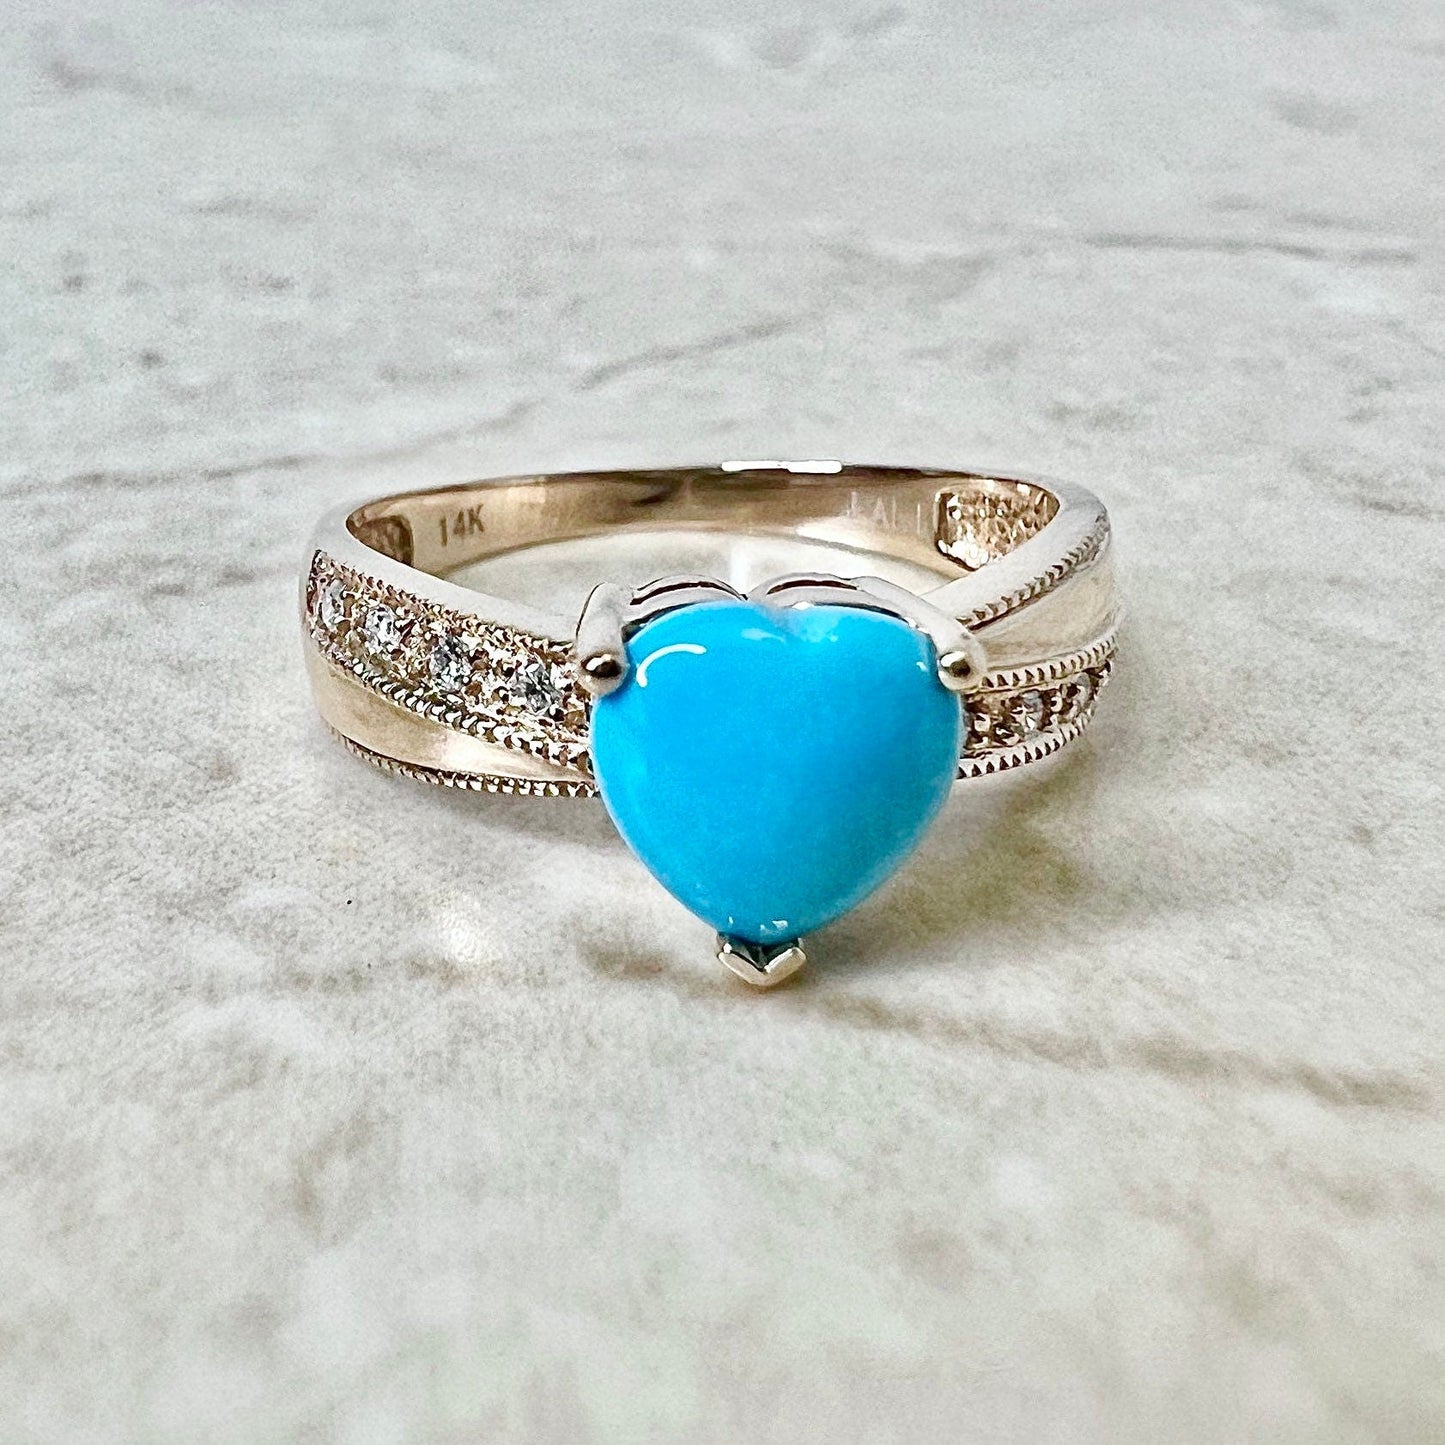 14K Gold Turquoise & Diamond Heart Cocktail Ring - Rose Gold Turquoise Ring - Gold Turquoise Solitaire Ring - Valentine’s Day Gifts For Her